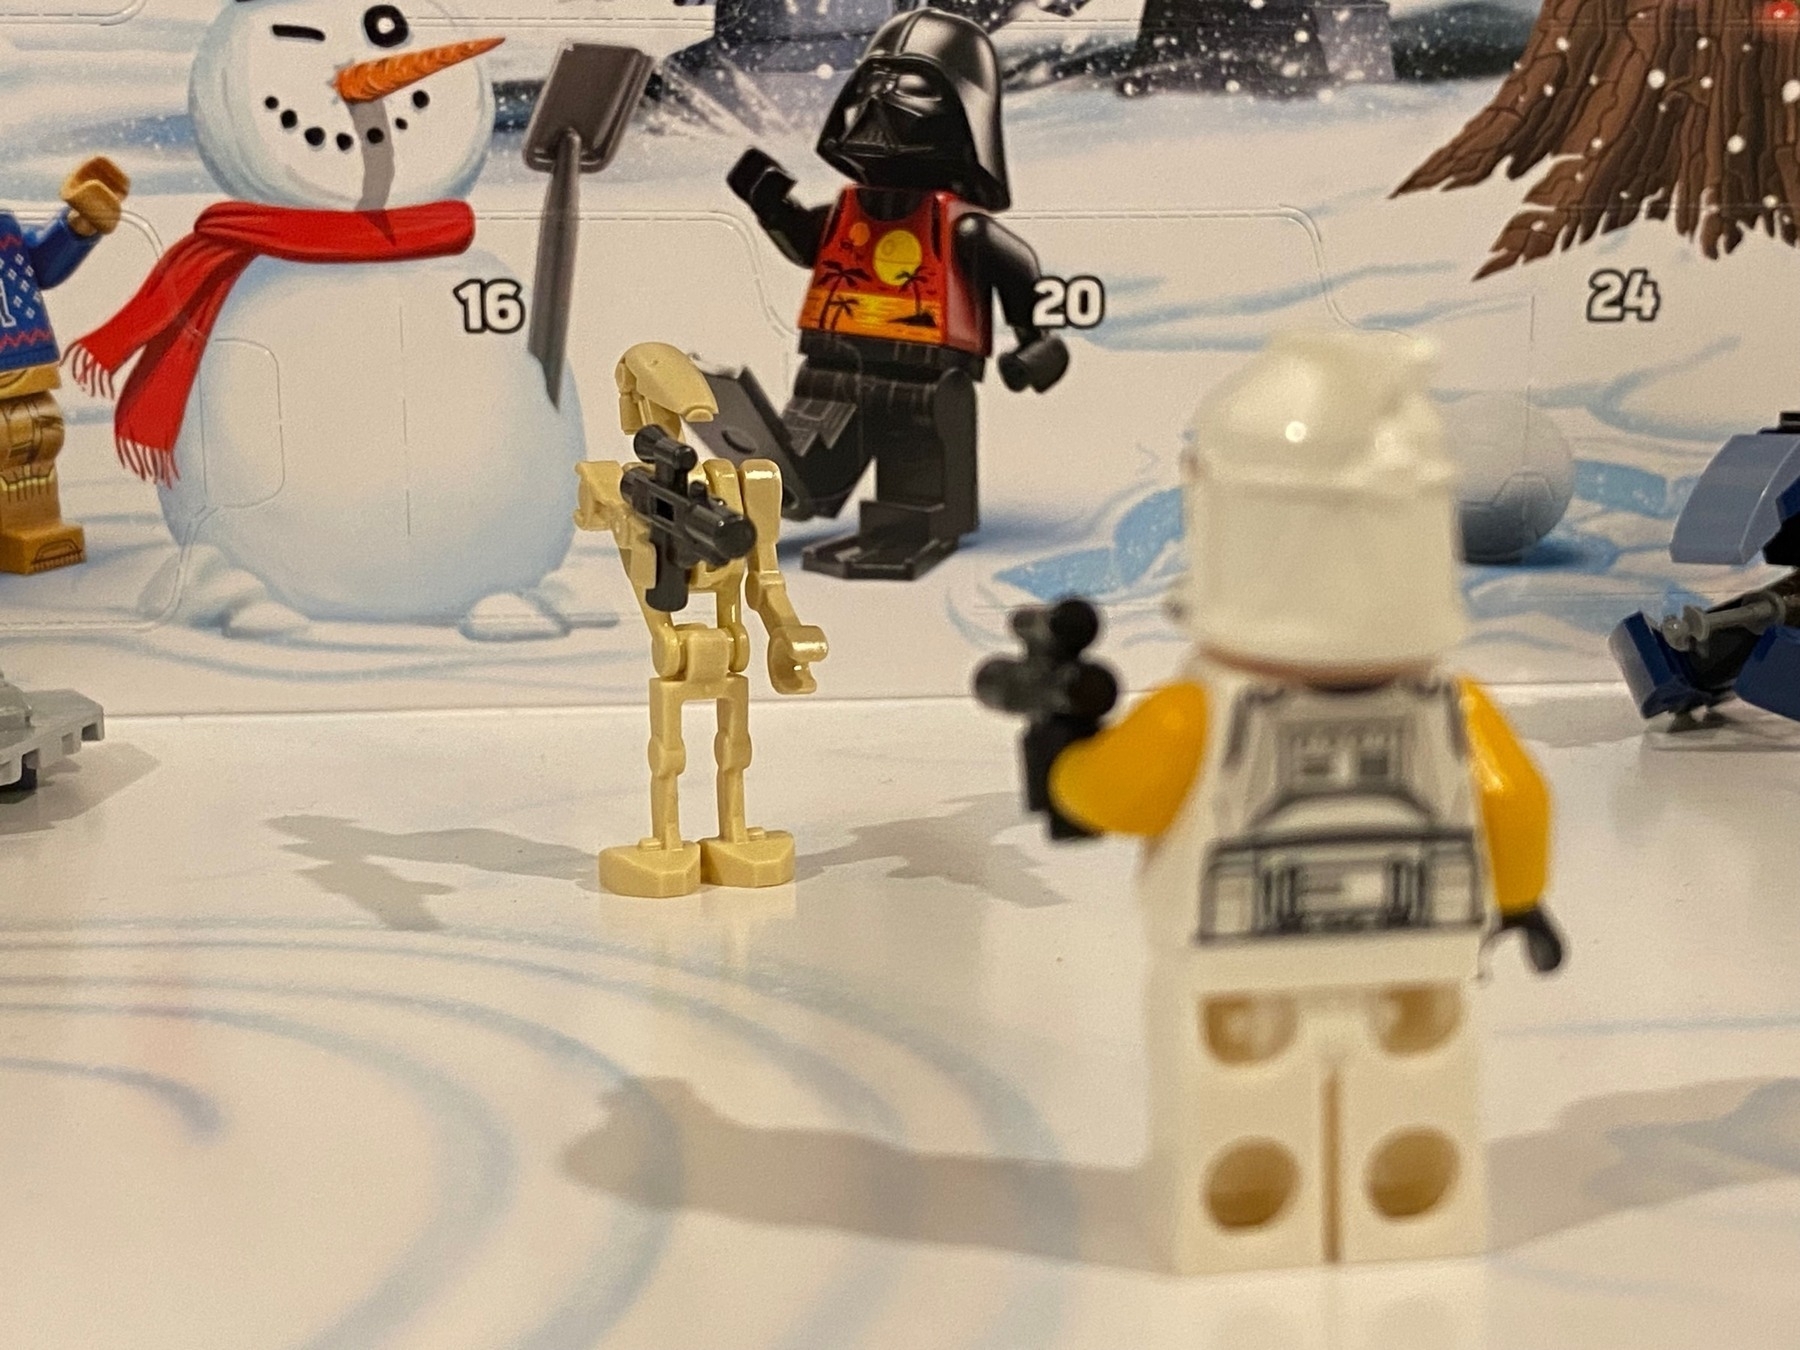 the Lego droid trooper facing off against the clone trooper from earlier, both pointing their lego guns at each other